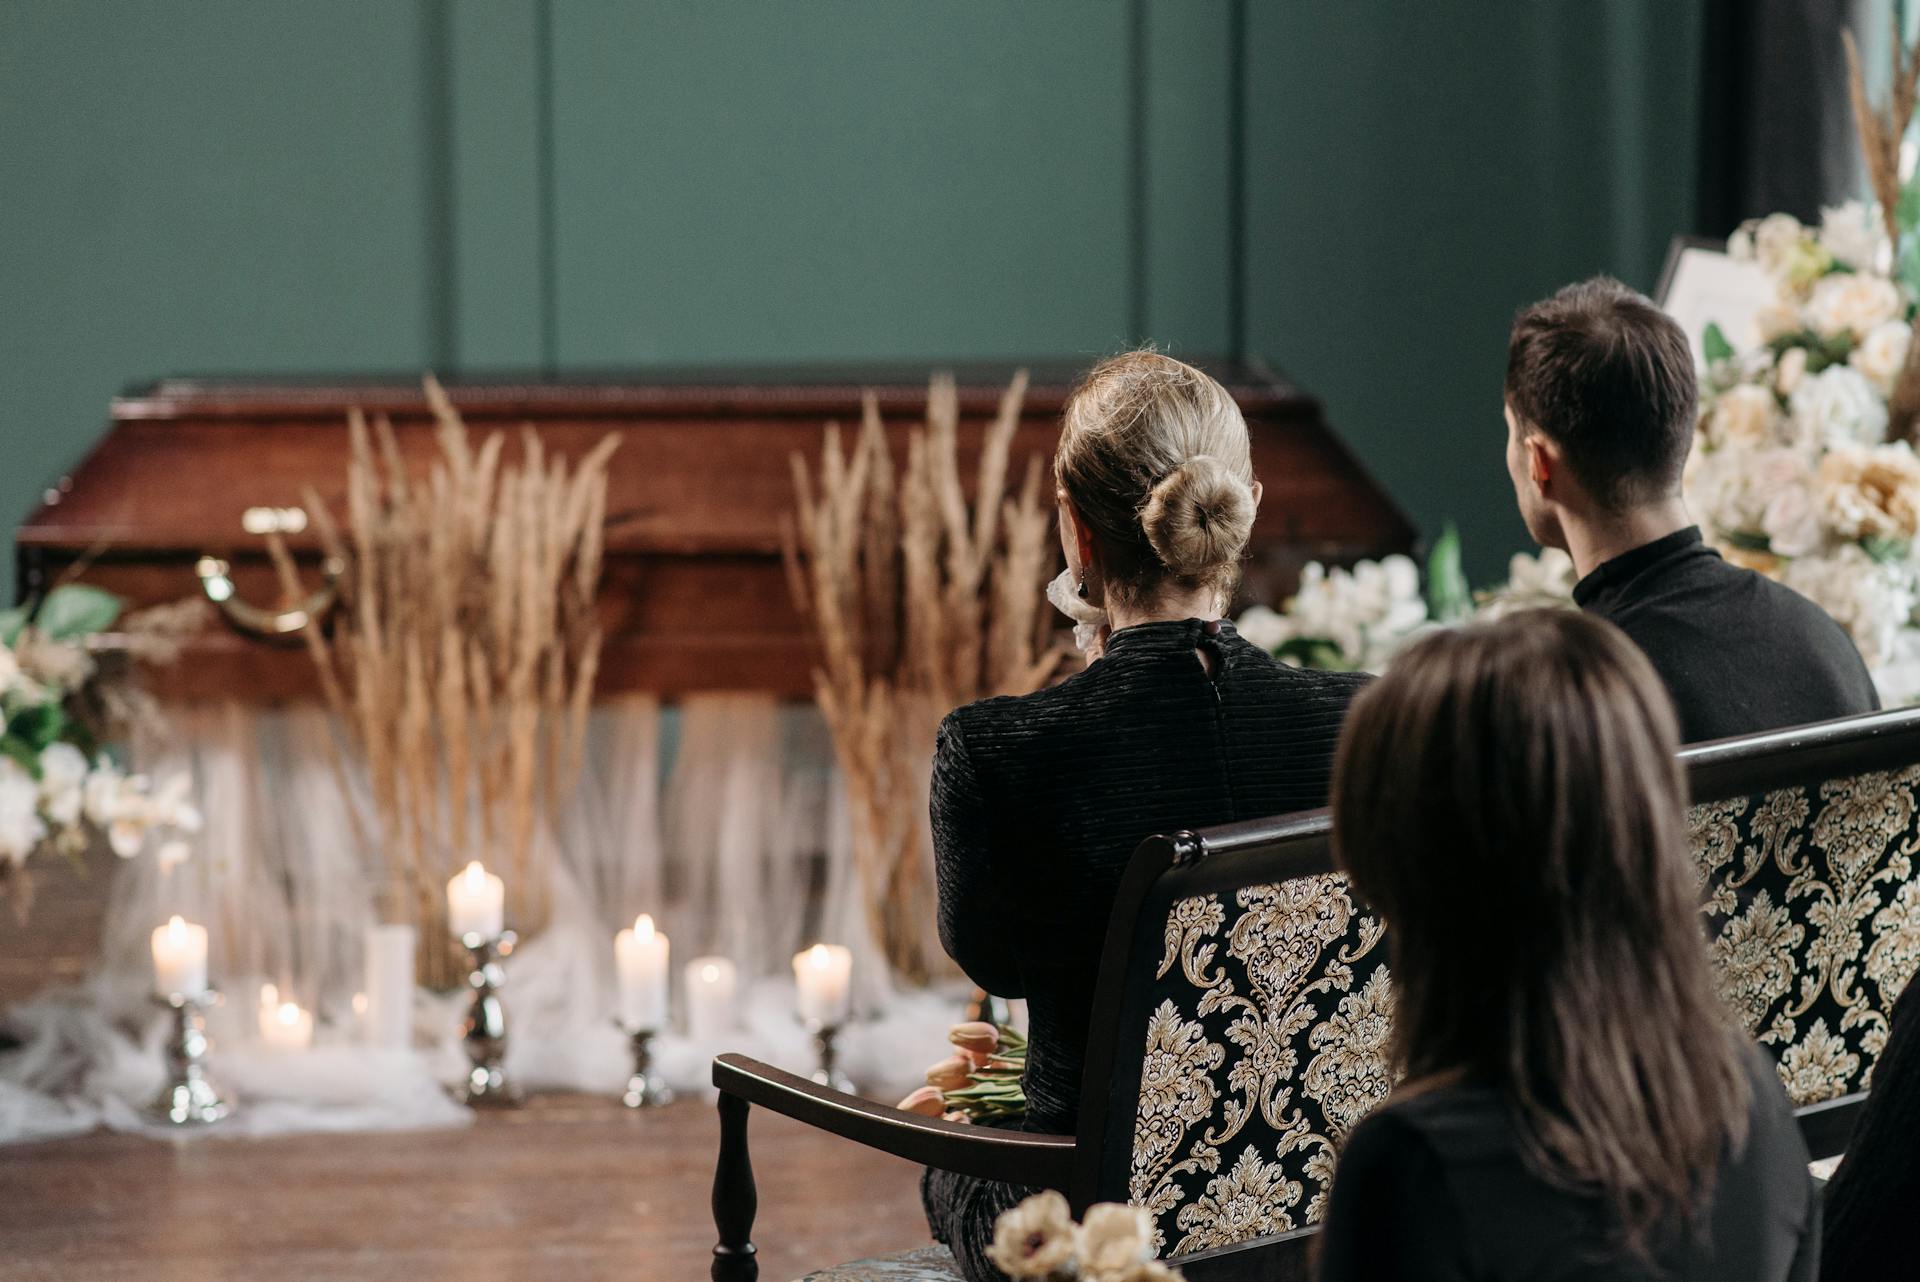 People at a funeral | Source: Pexels